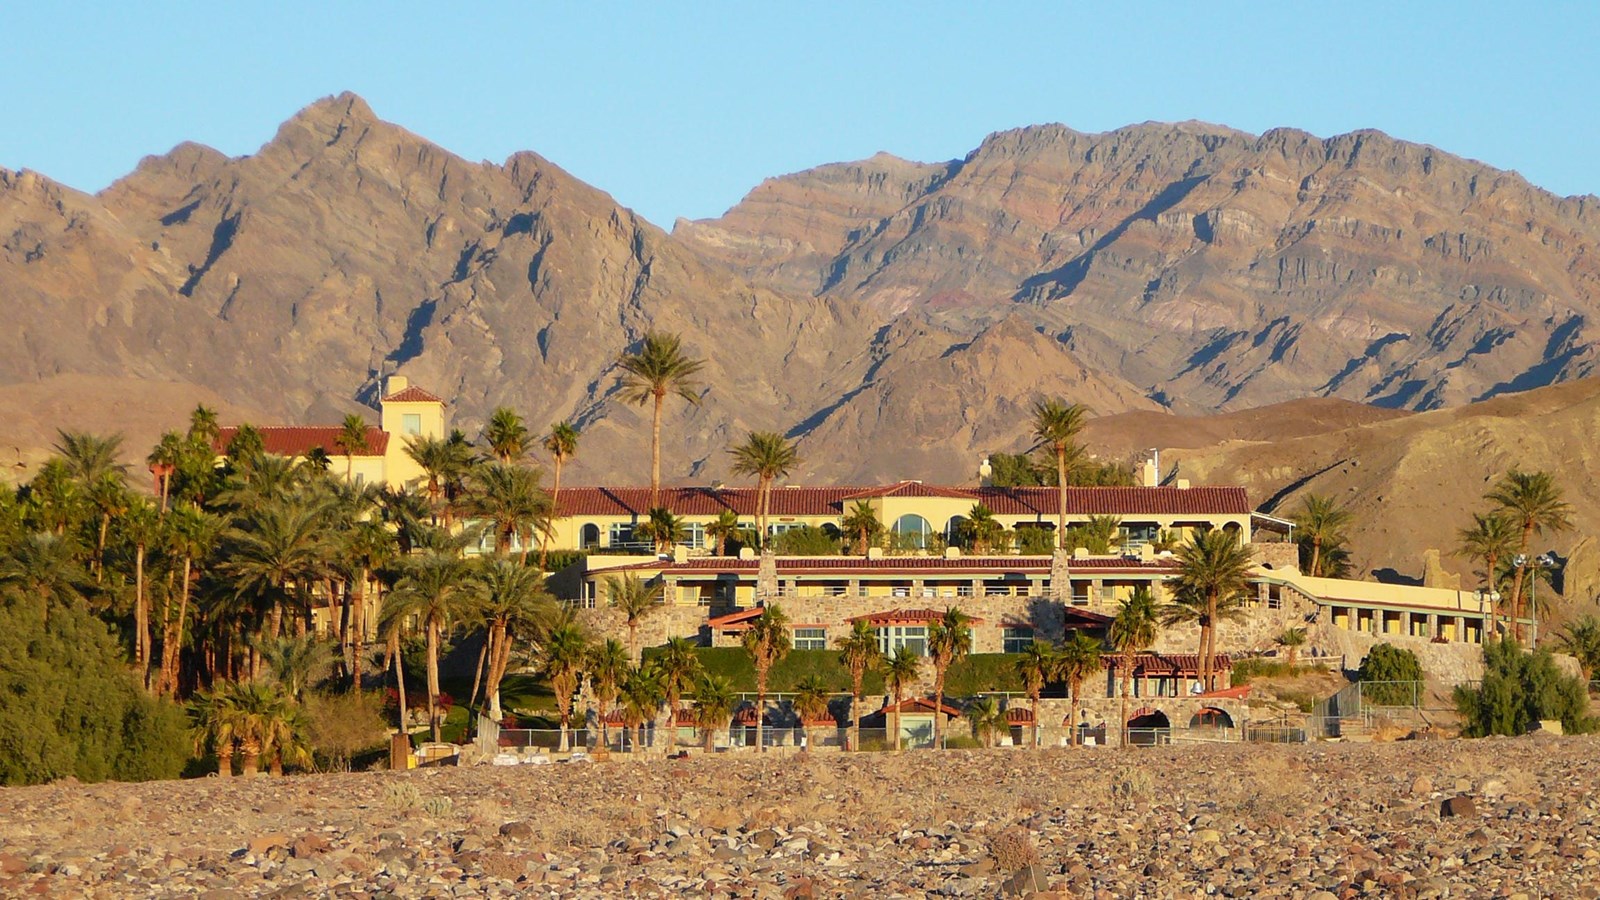 a large castle like structure with palm trees in a desert setting